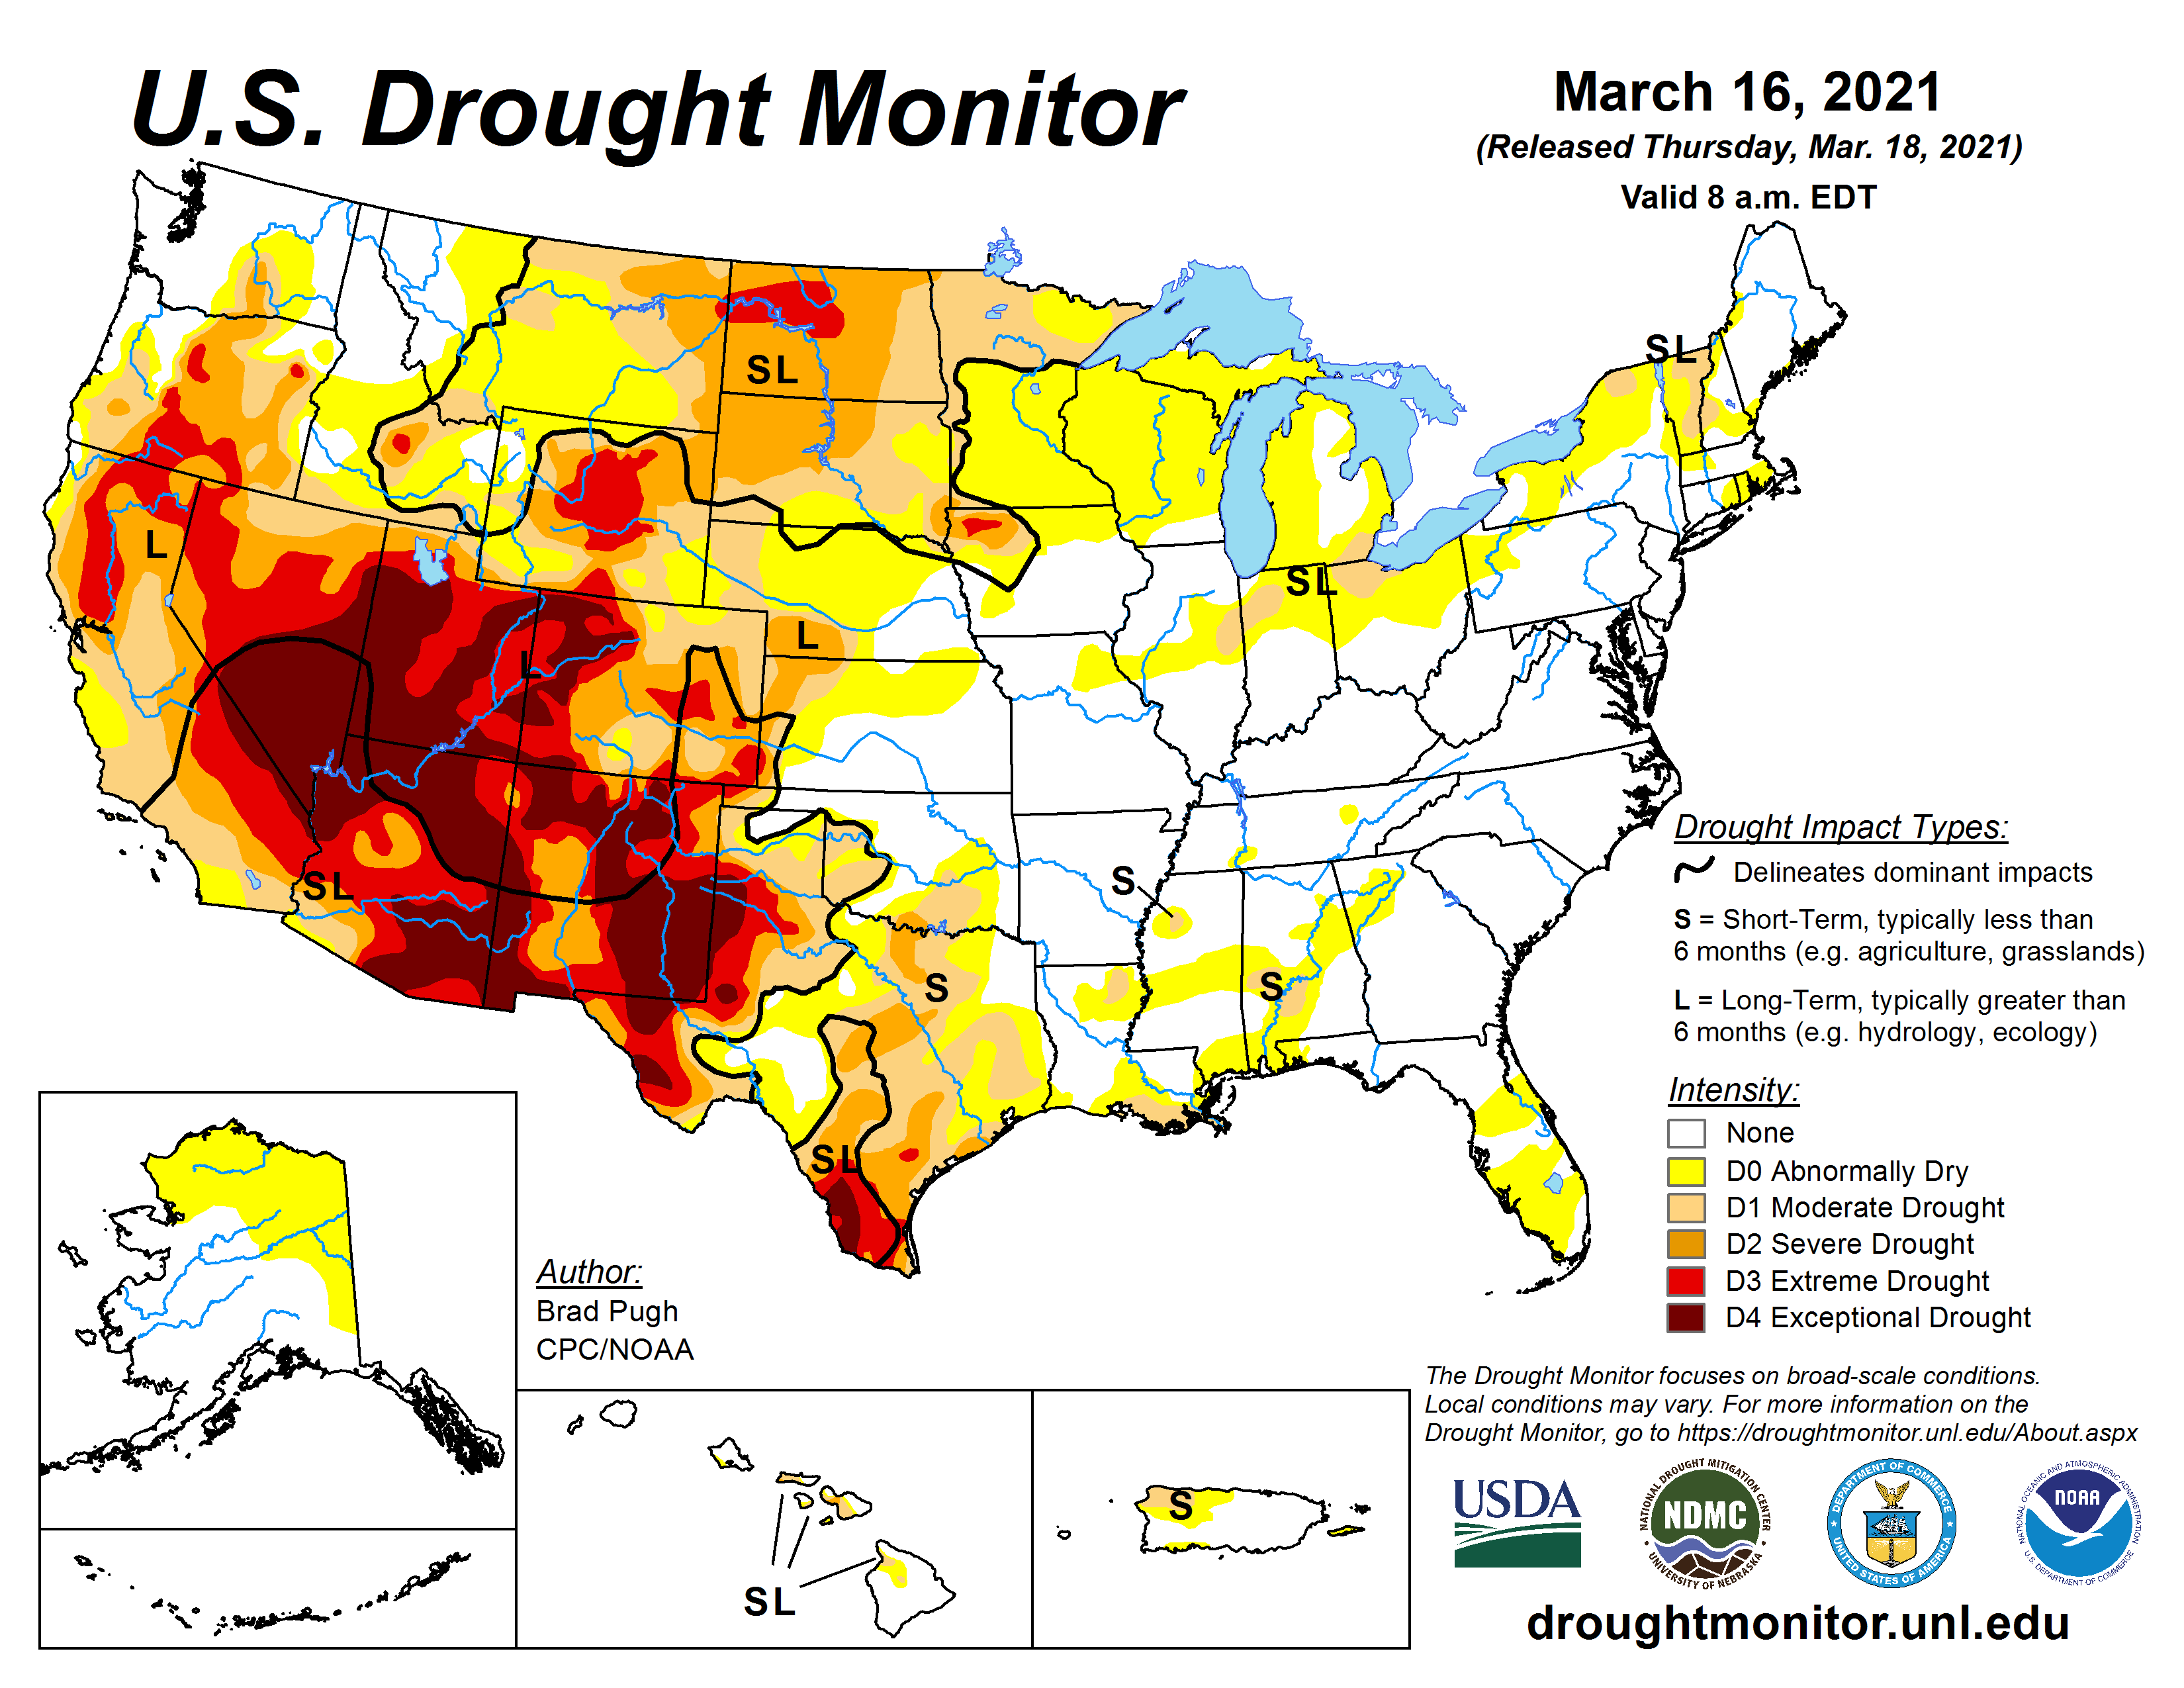 Drought Monitor March 18, 2021 map of drought conditions